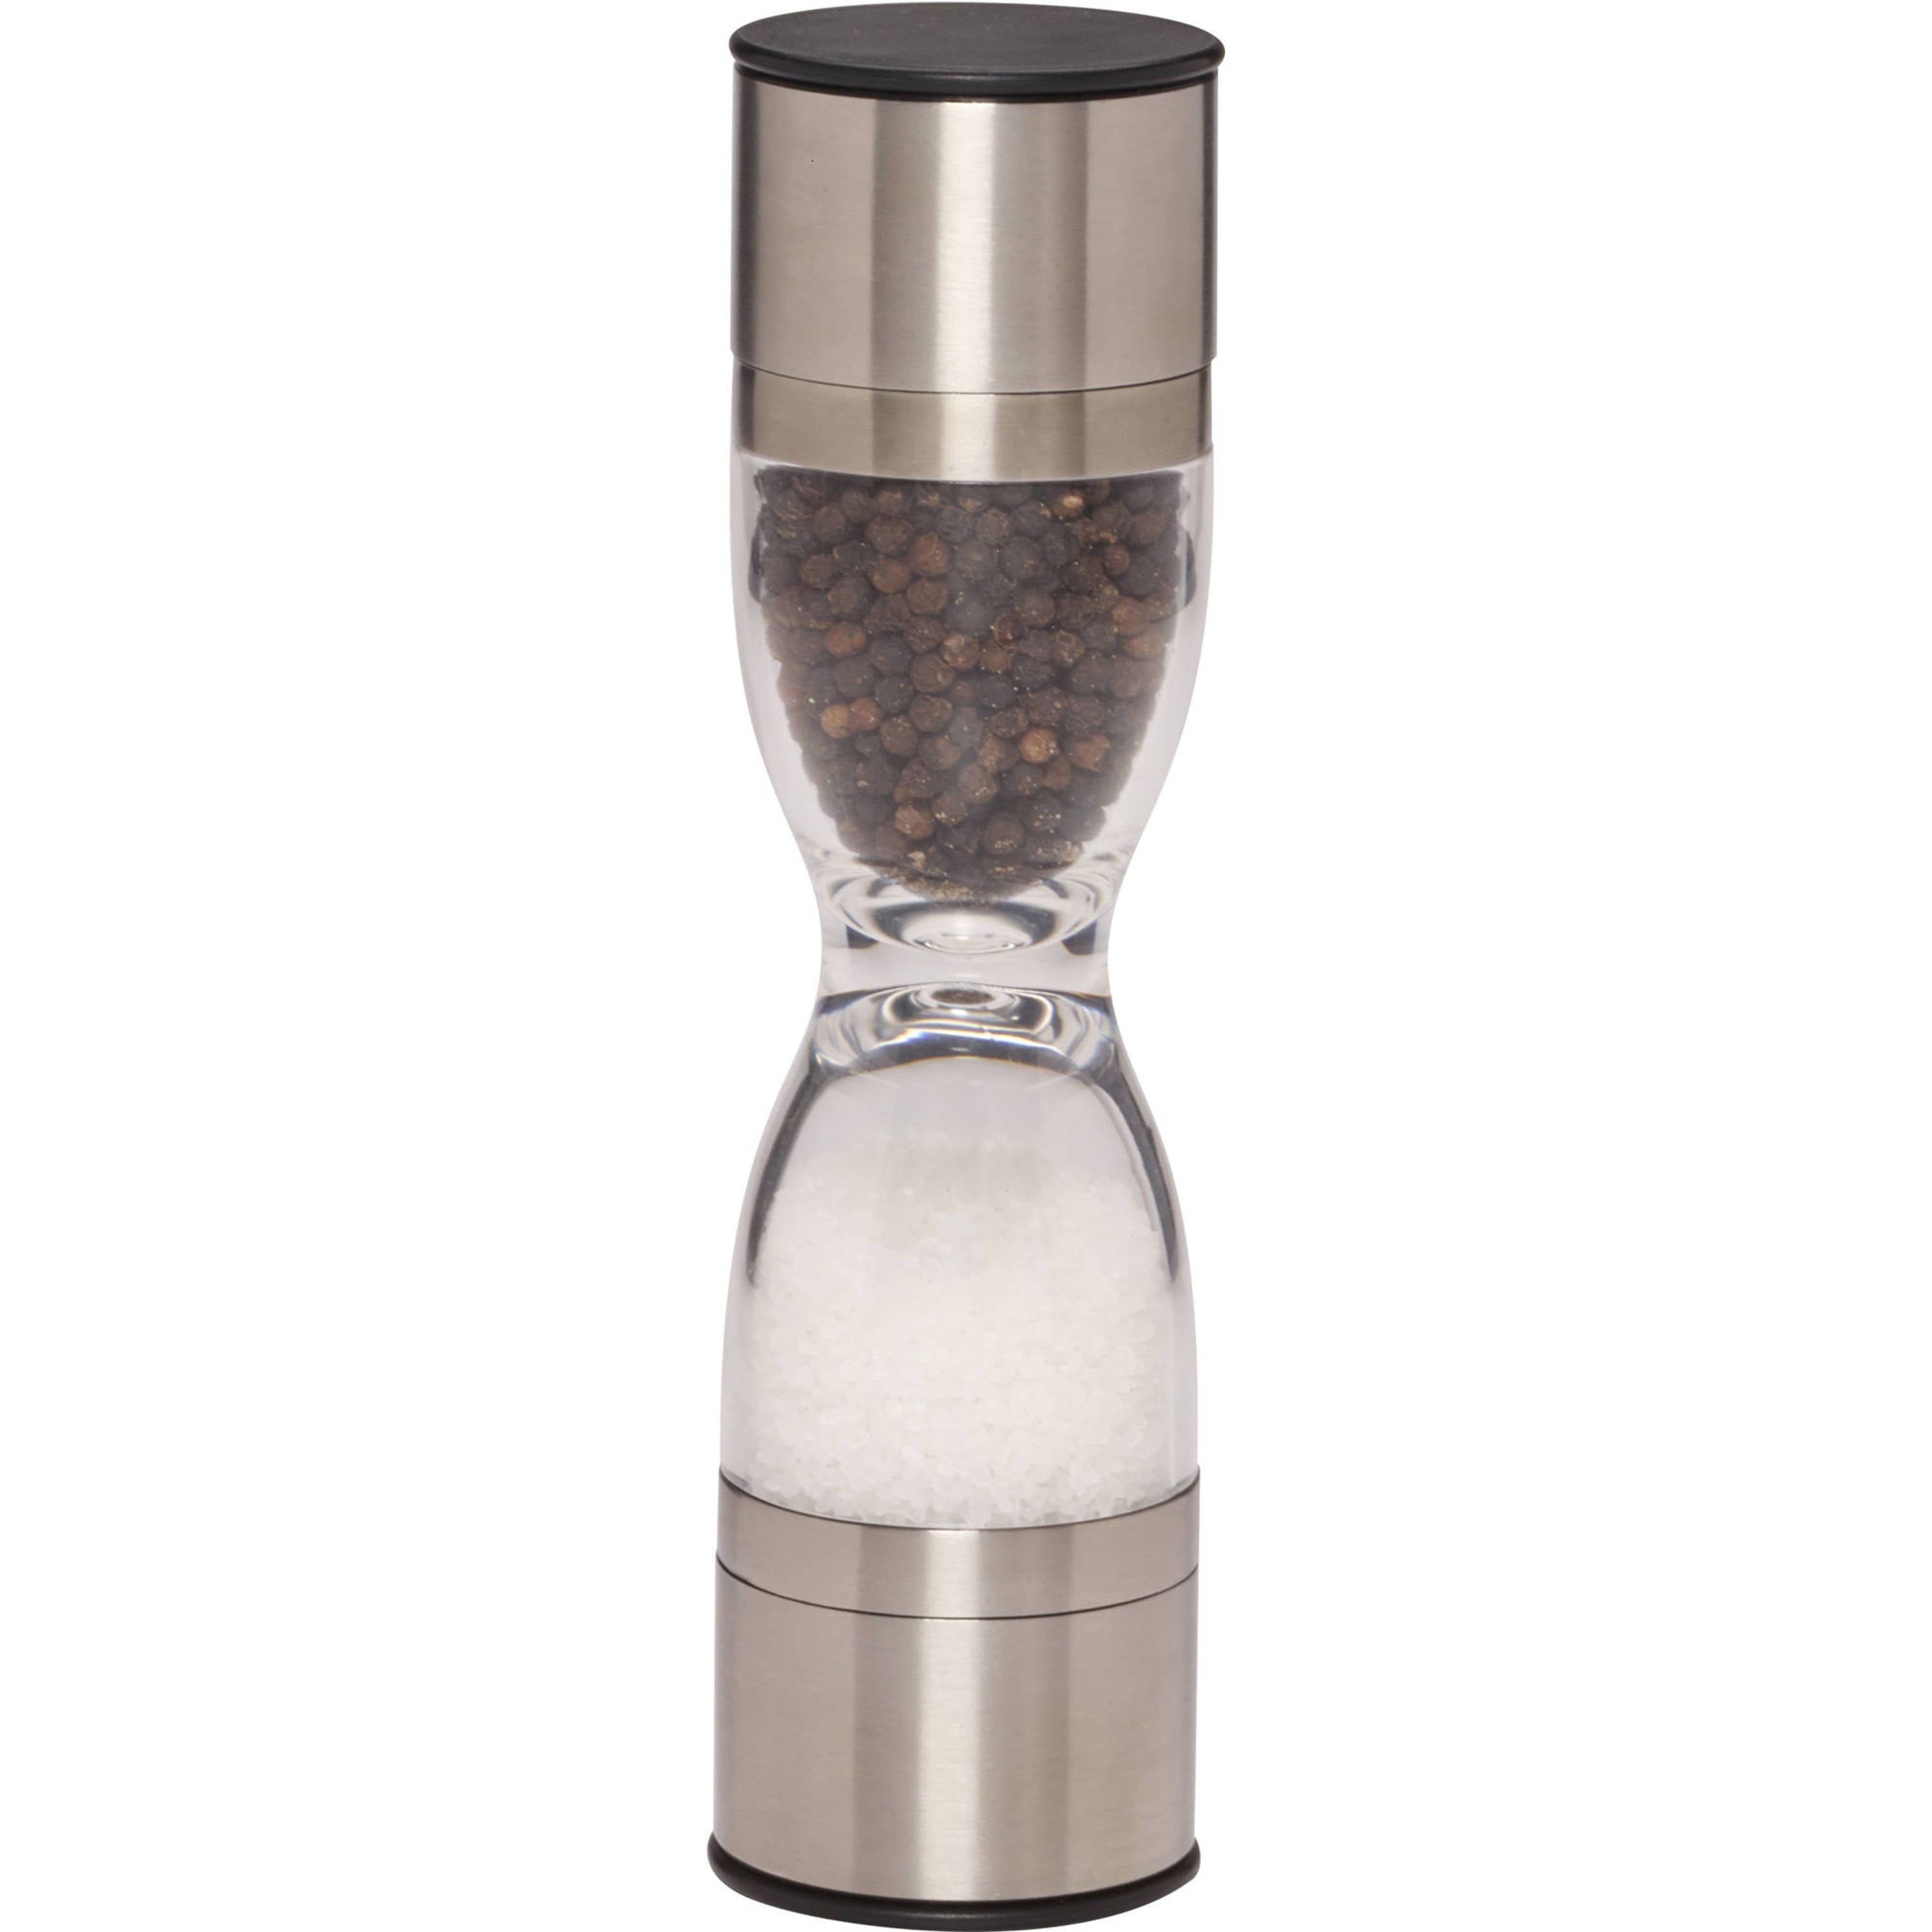 HexMill Salt Grinder - Fast, Heavy-Duty Salt Mill with Unique Burr Grinder,  Ten Grind Settings, Button-Enabled with Quick-Release Cap 